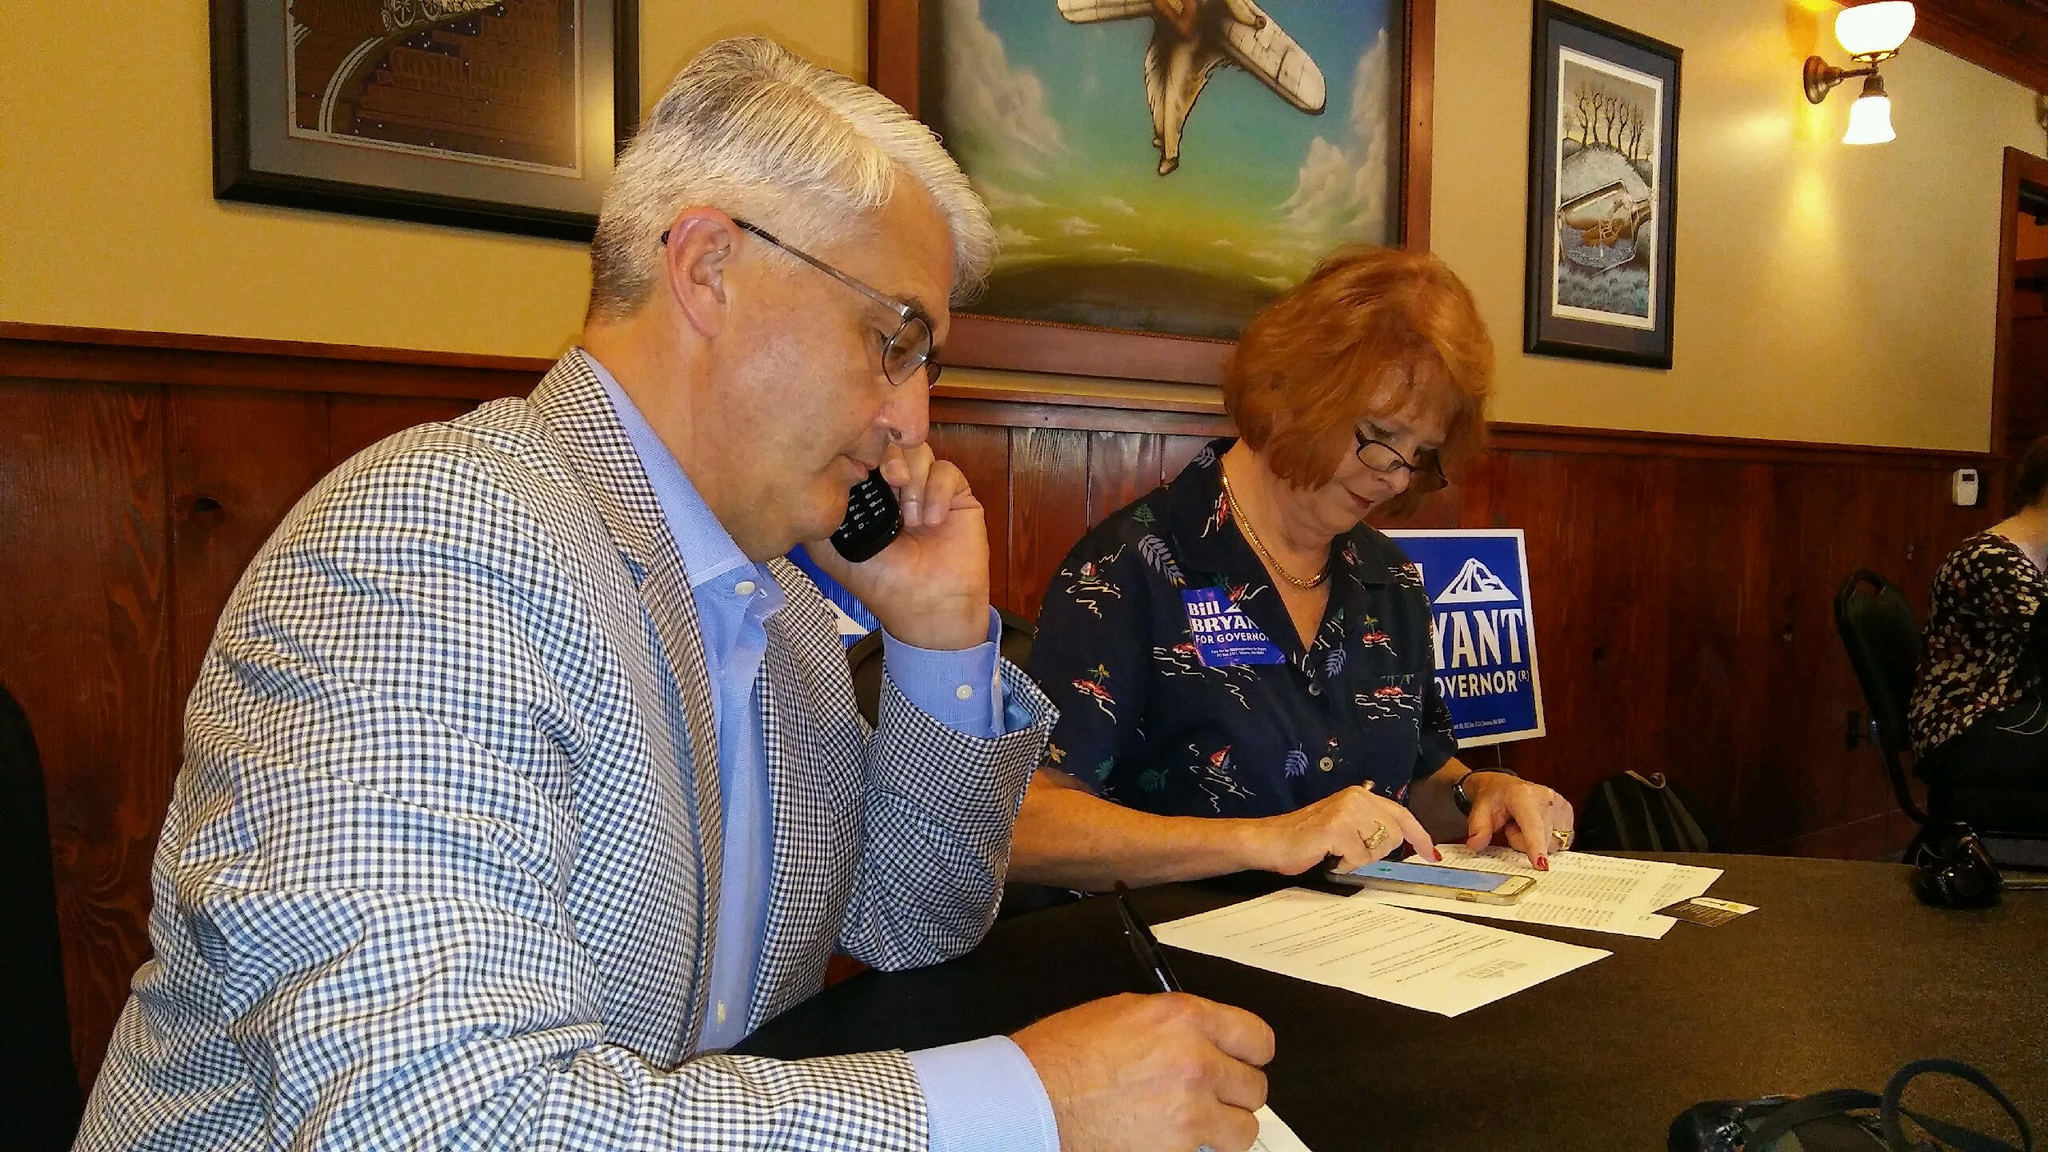 Bill Bryant makes campaign phone calls along with a volunteer. Aaron Kunkler/Bothell Reporter